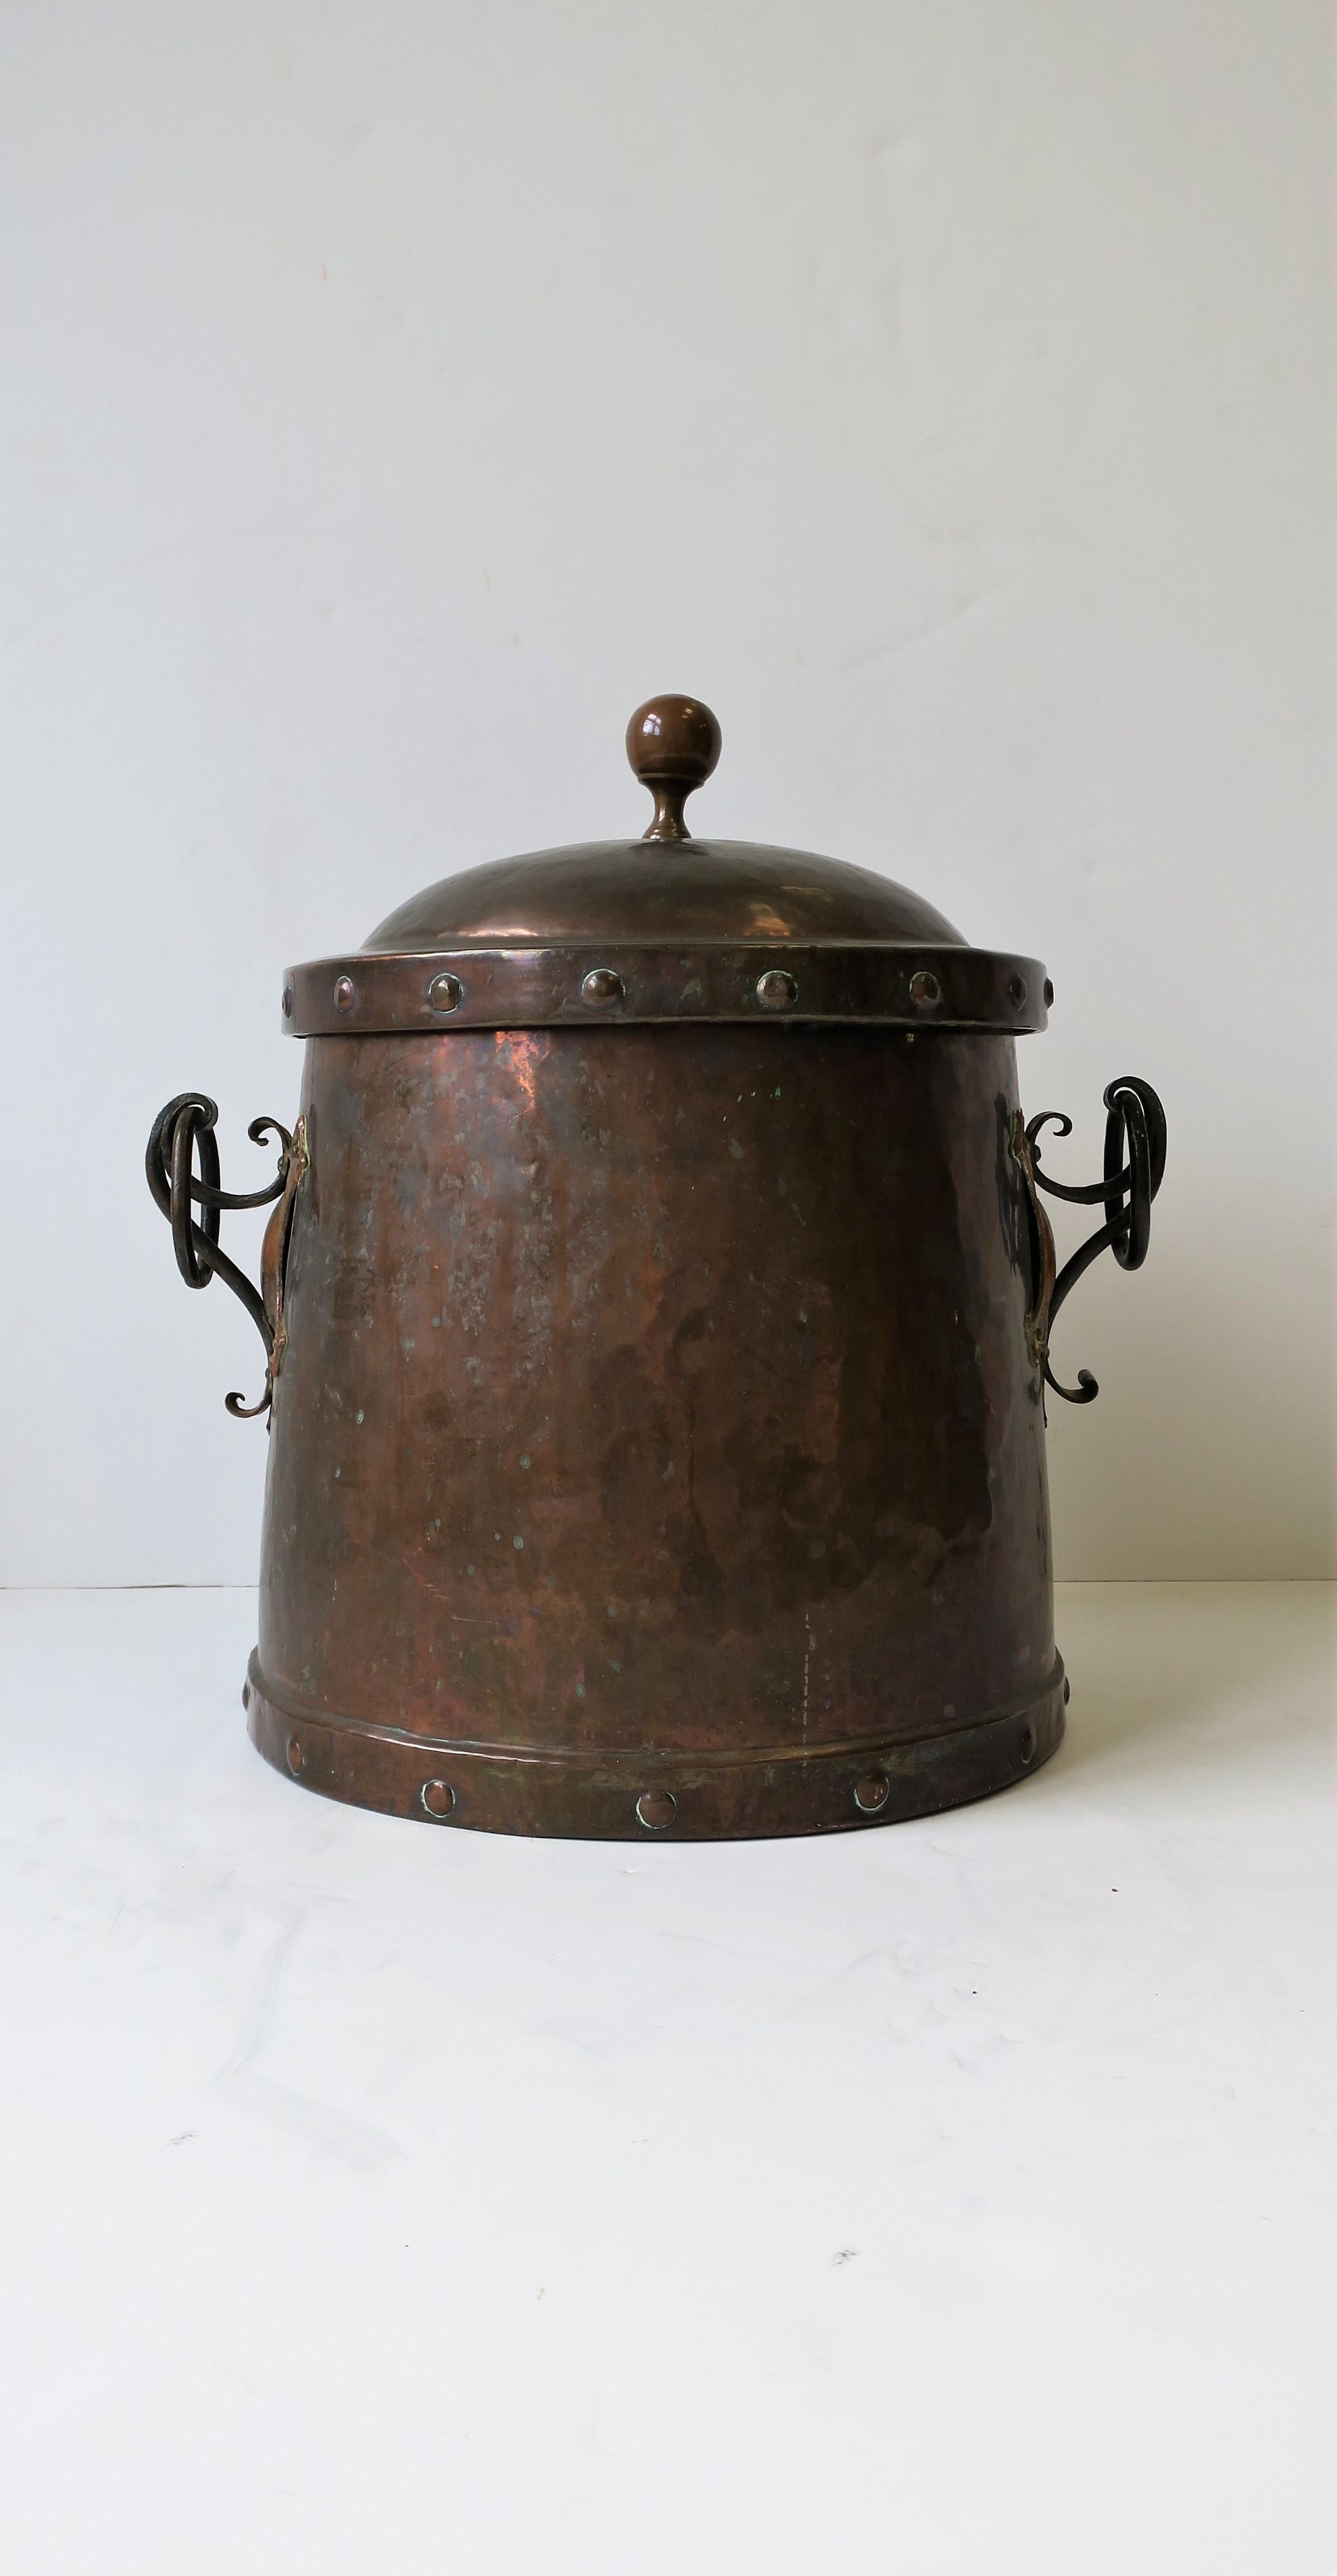 A beautiful and substantial Arts & Crafts large copper and bronze fireplace chimney pot with cover. Pot/bucket has rivet design and round finial top, beautiful medieval detail, rivet base design, and oval ring handles. All hand hammered with